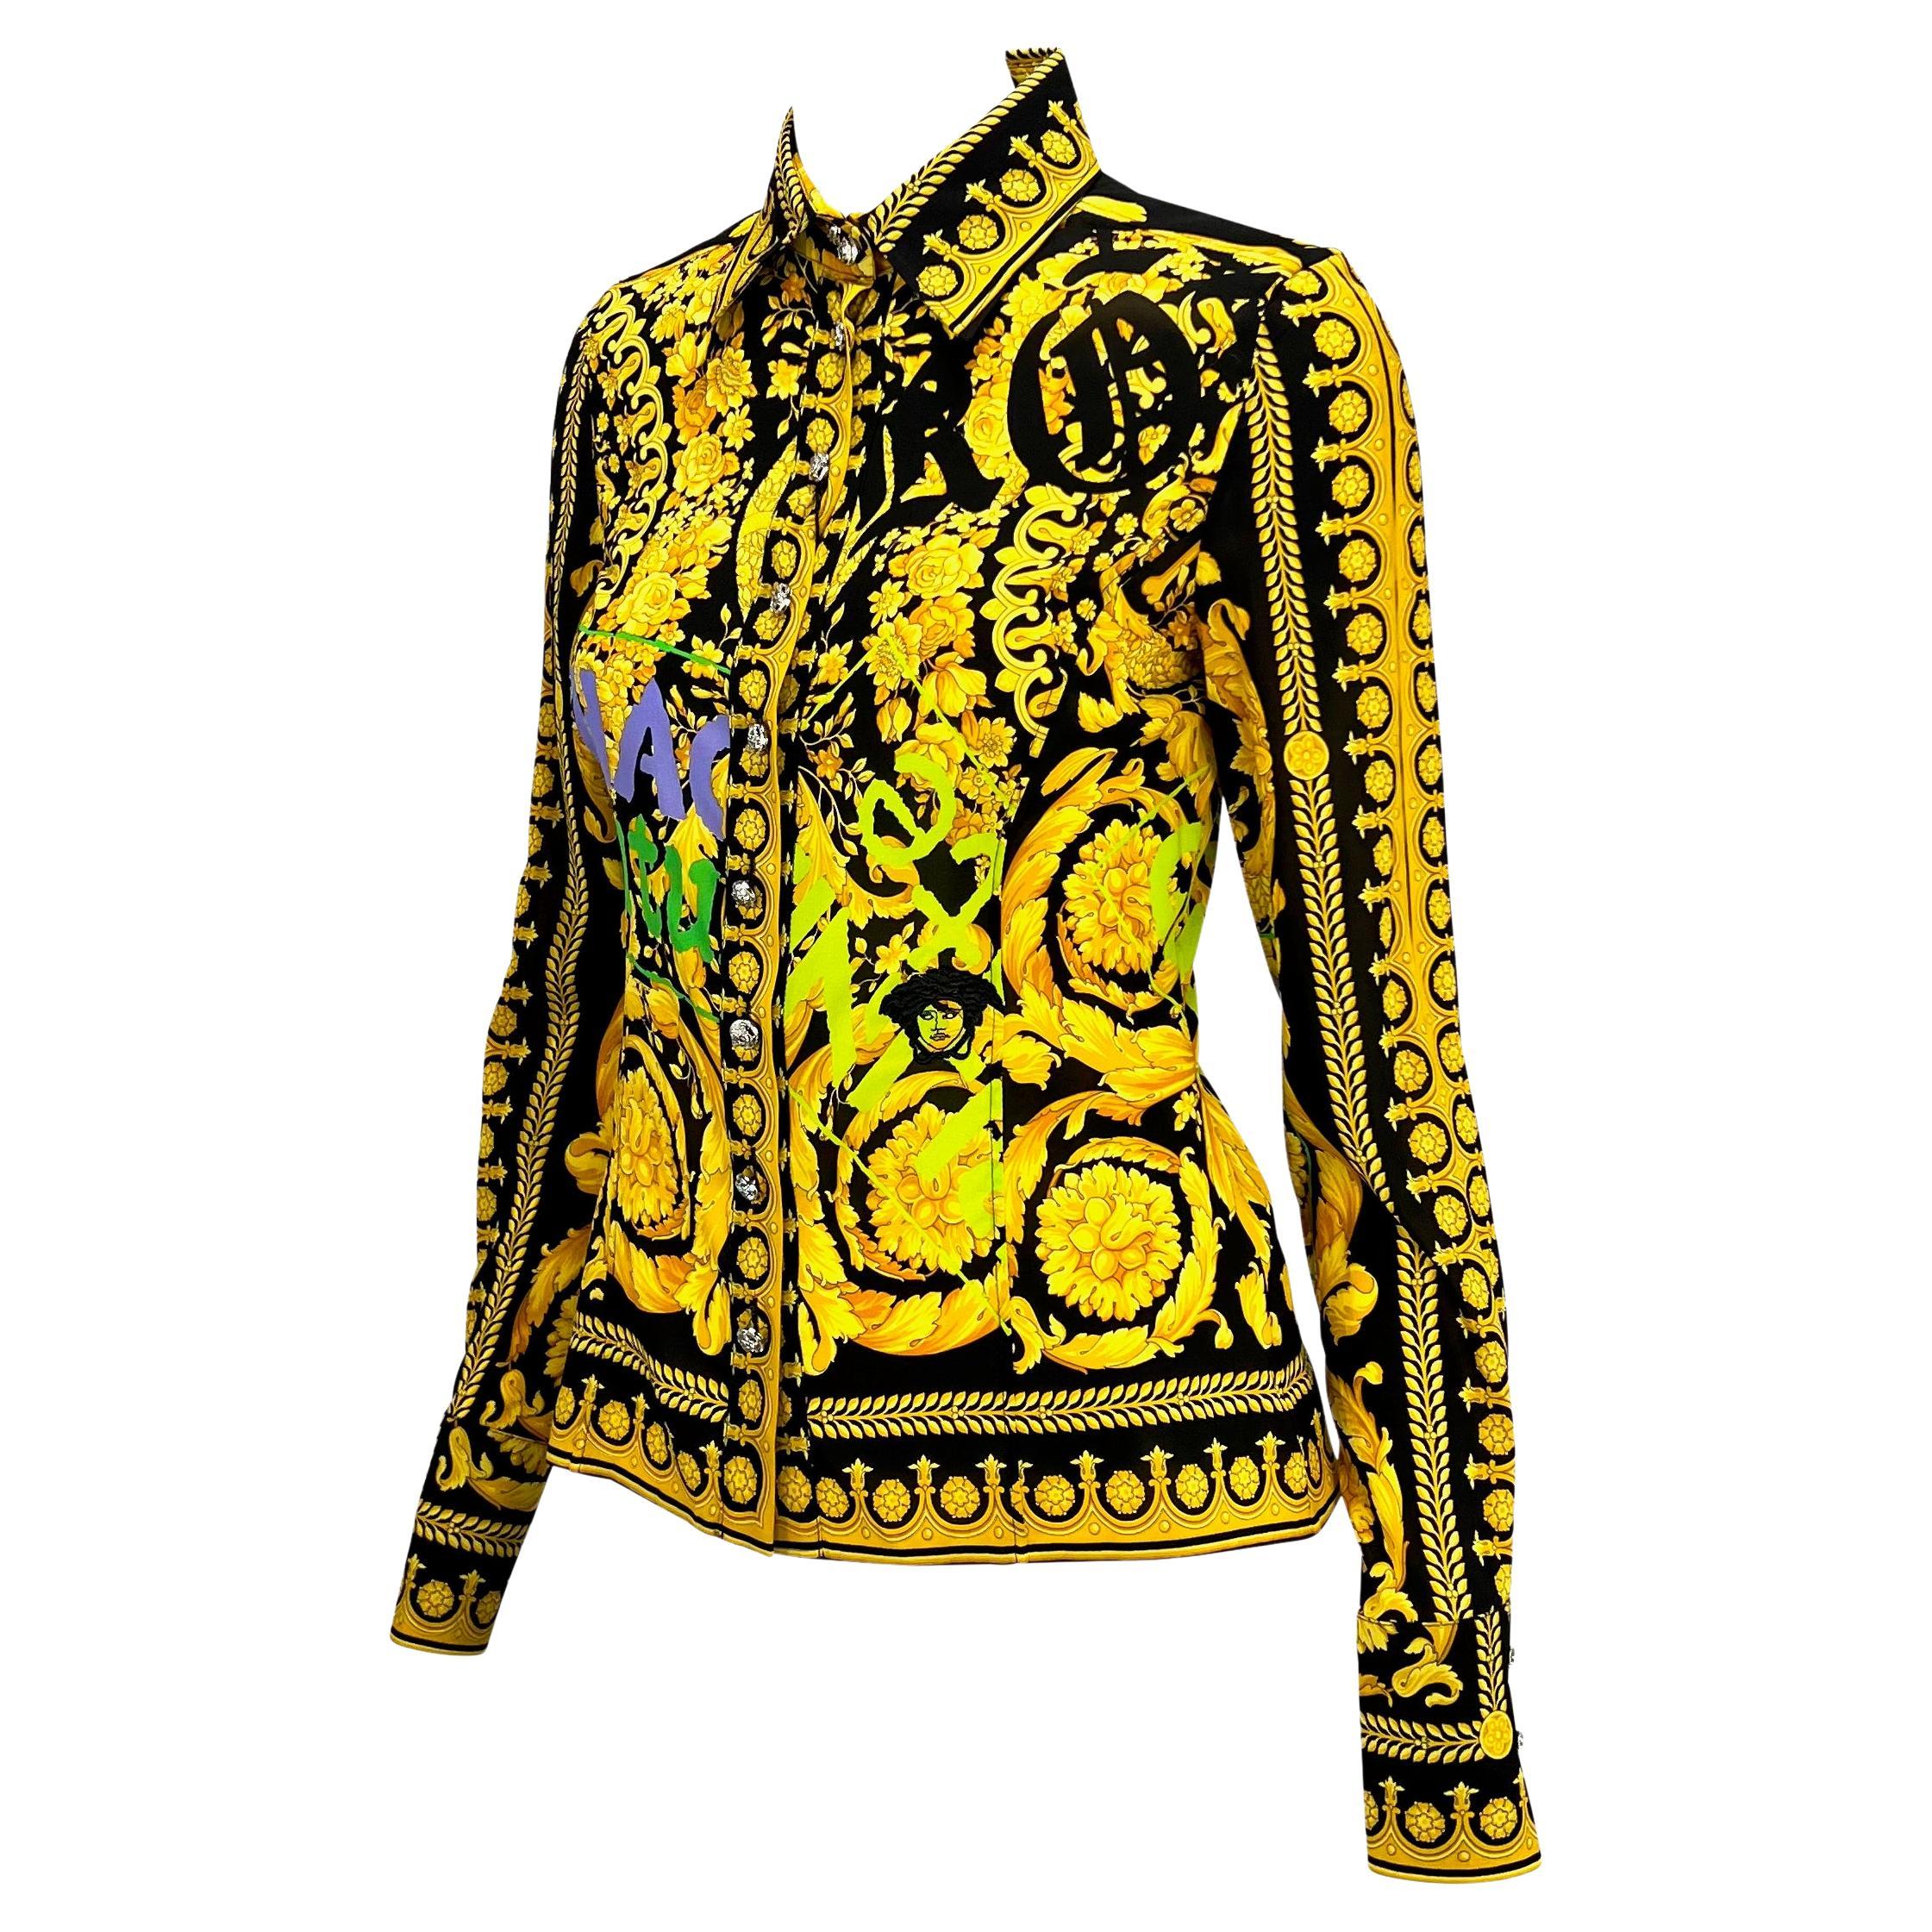 Presenting a Versace Chaos Couture collection shirt, designed by Donatella Versace. This collared shirt features neon 'Chaos Couture' stamps atop the classic gold and black Versace baroque pattern and an embroidered Medusa. Made complete with silver